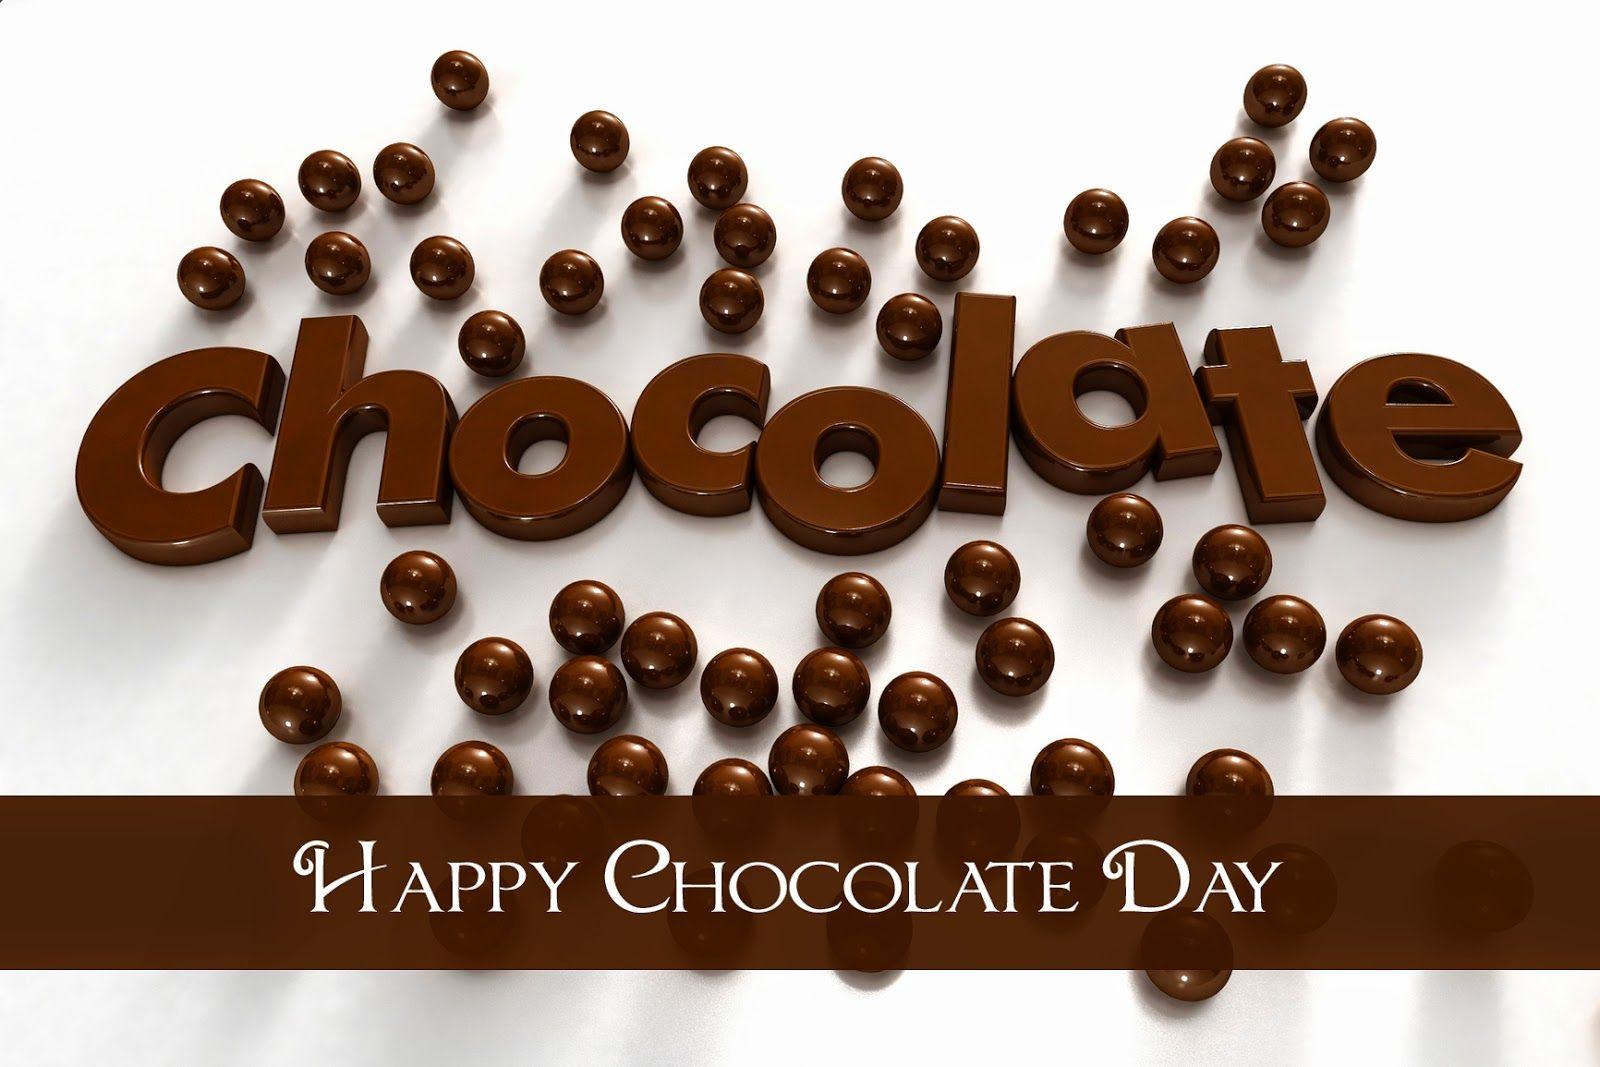 happy chocolate day chocolate day 2017 hd image photos for